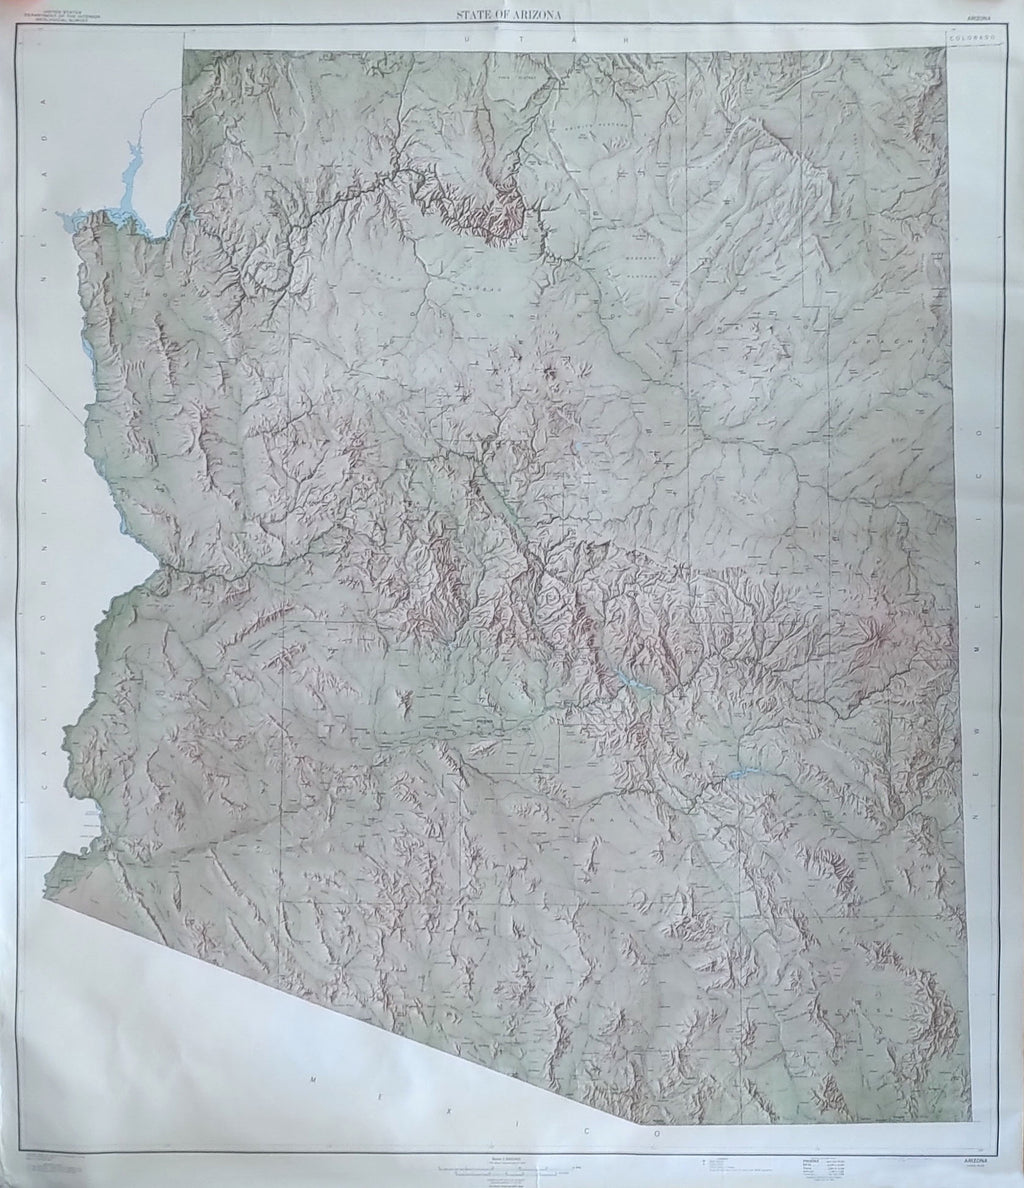 State of Arizona map, U.S.G.S. color shaded relief map of the state of AZ.